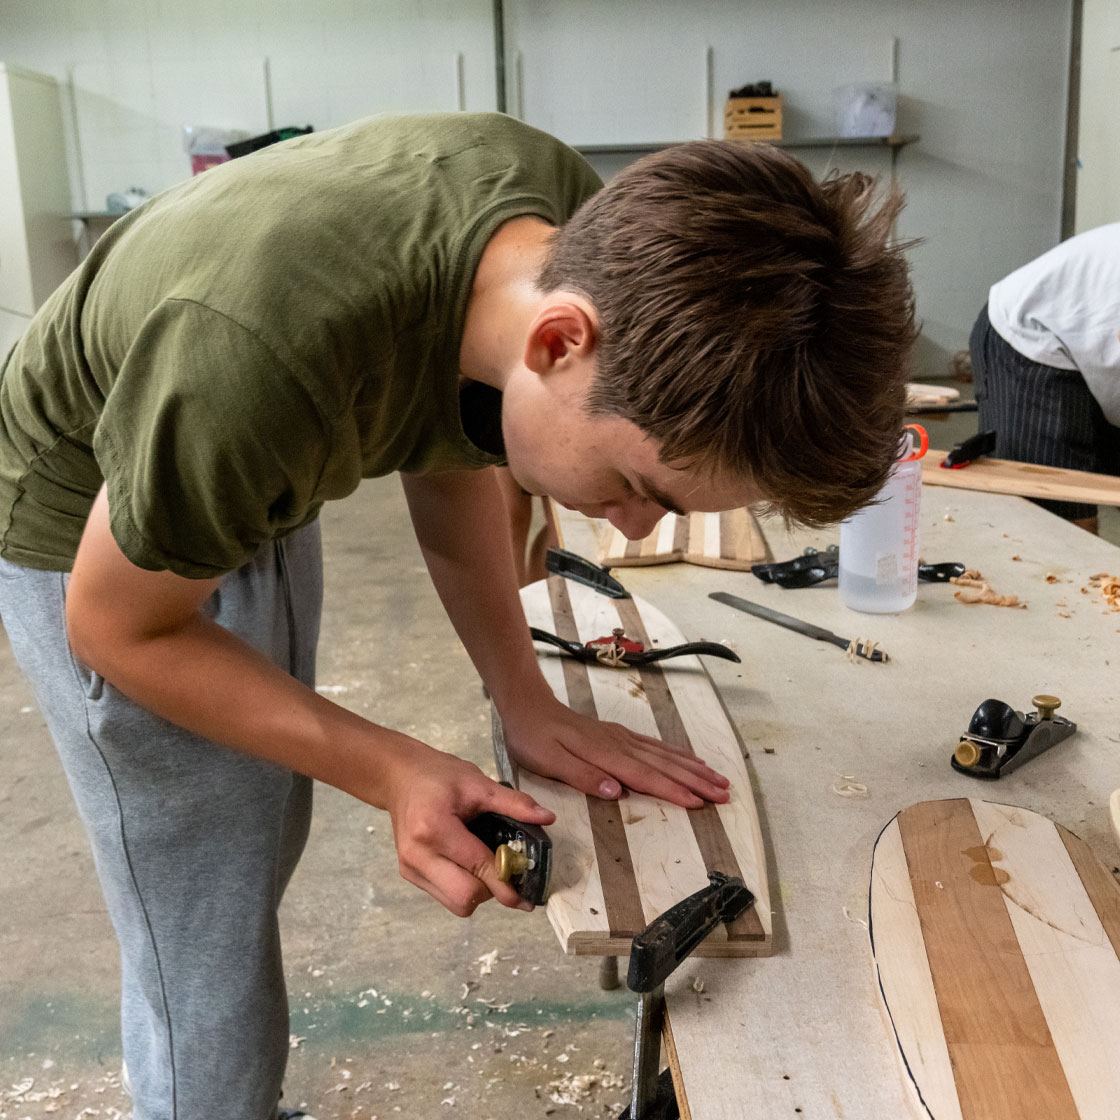 A young person working on a woodworking project